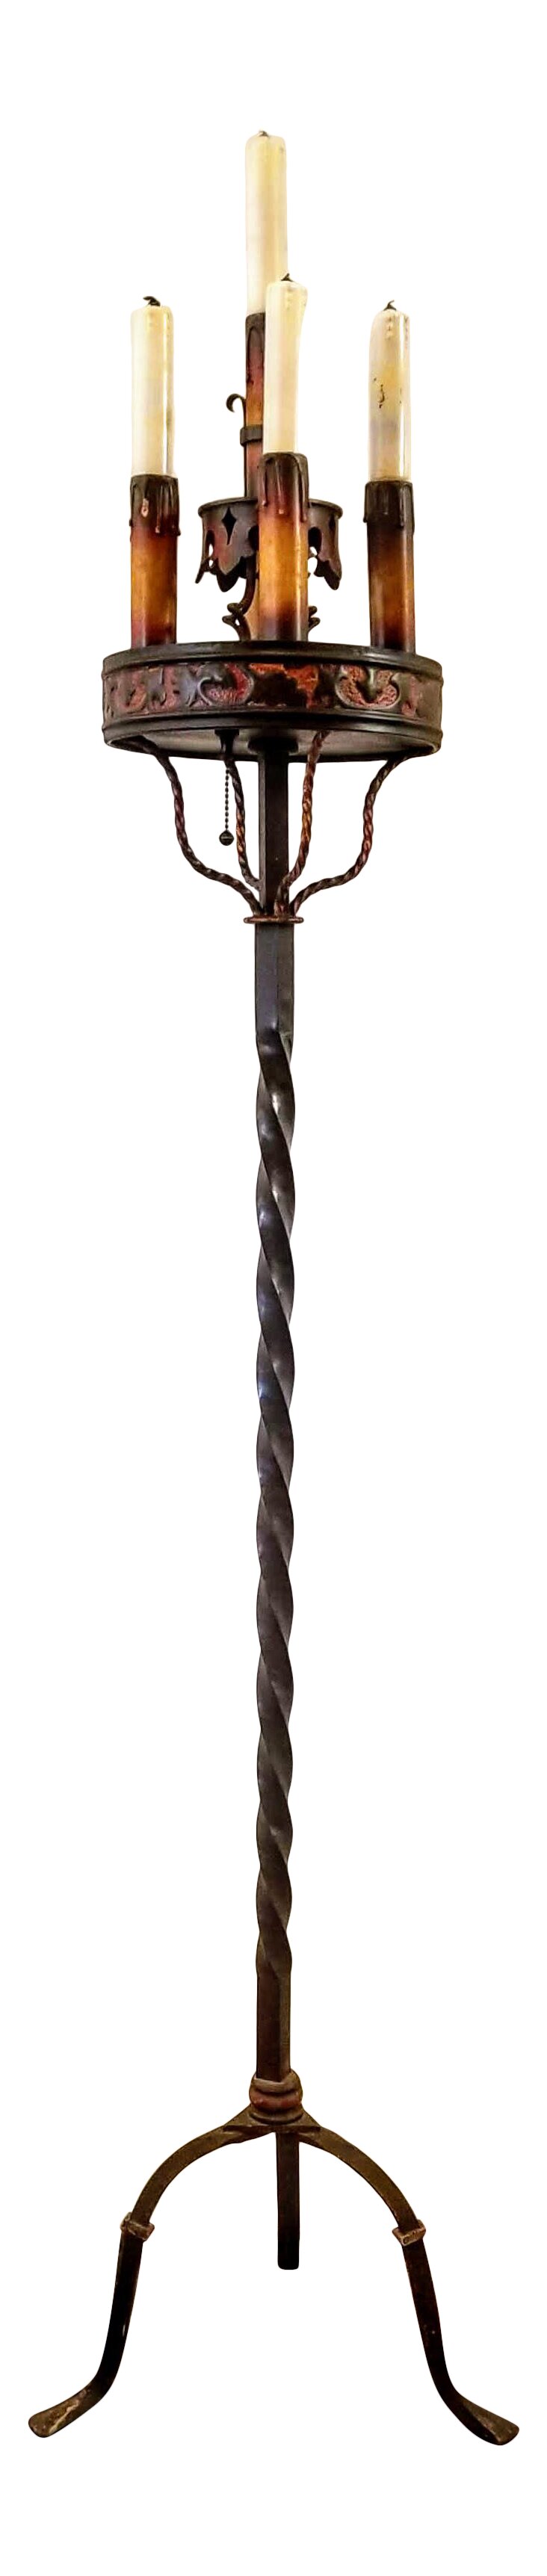 Bring an element of Old World Charm into your space with this vintage late-1920s to early-1930s Spanish Colonial Revival Monterey style wrought iron floor lamp torchiere.  The fish-tail foot tripod base supports a vertical black wrought iron twist topped with four brass-tone twists crowned with a polychromed round on which sit a candelabra of five polychromed bulb insets. The painted glass bulbs are in the shape of dripping pillar candles with black wicks.  The hand-forged and blacksmith-worked iron guarantees enduring quality.  The electric lamp is in working order. A chain pull turns on the light bulbs.